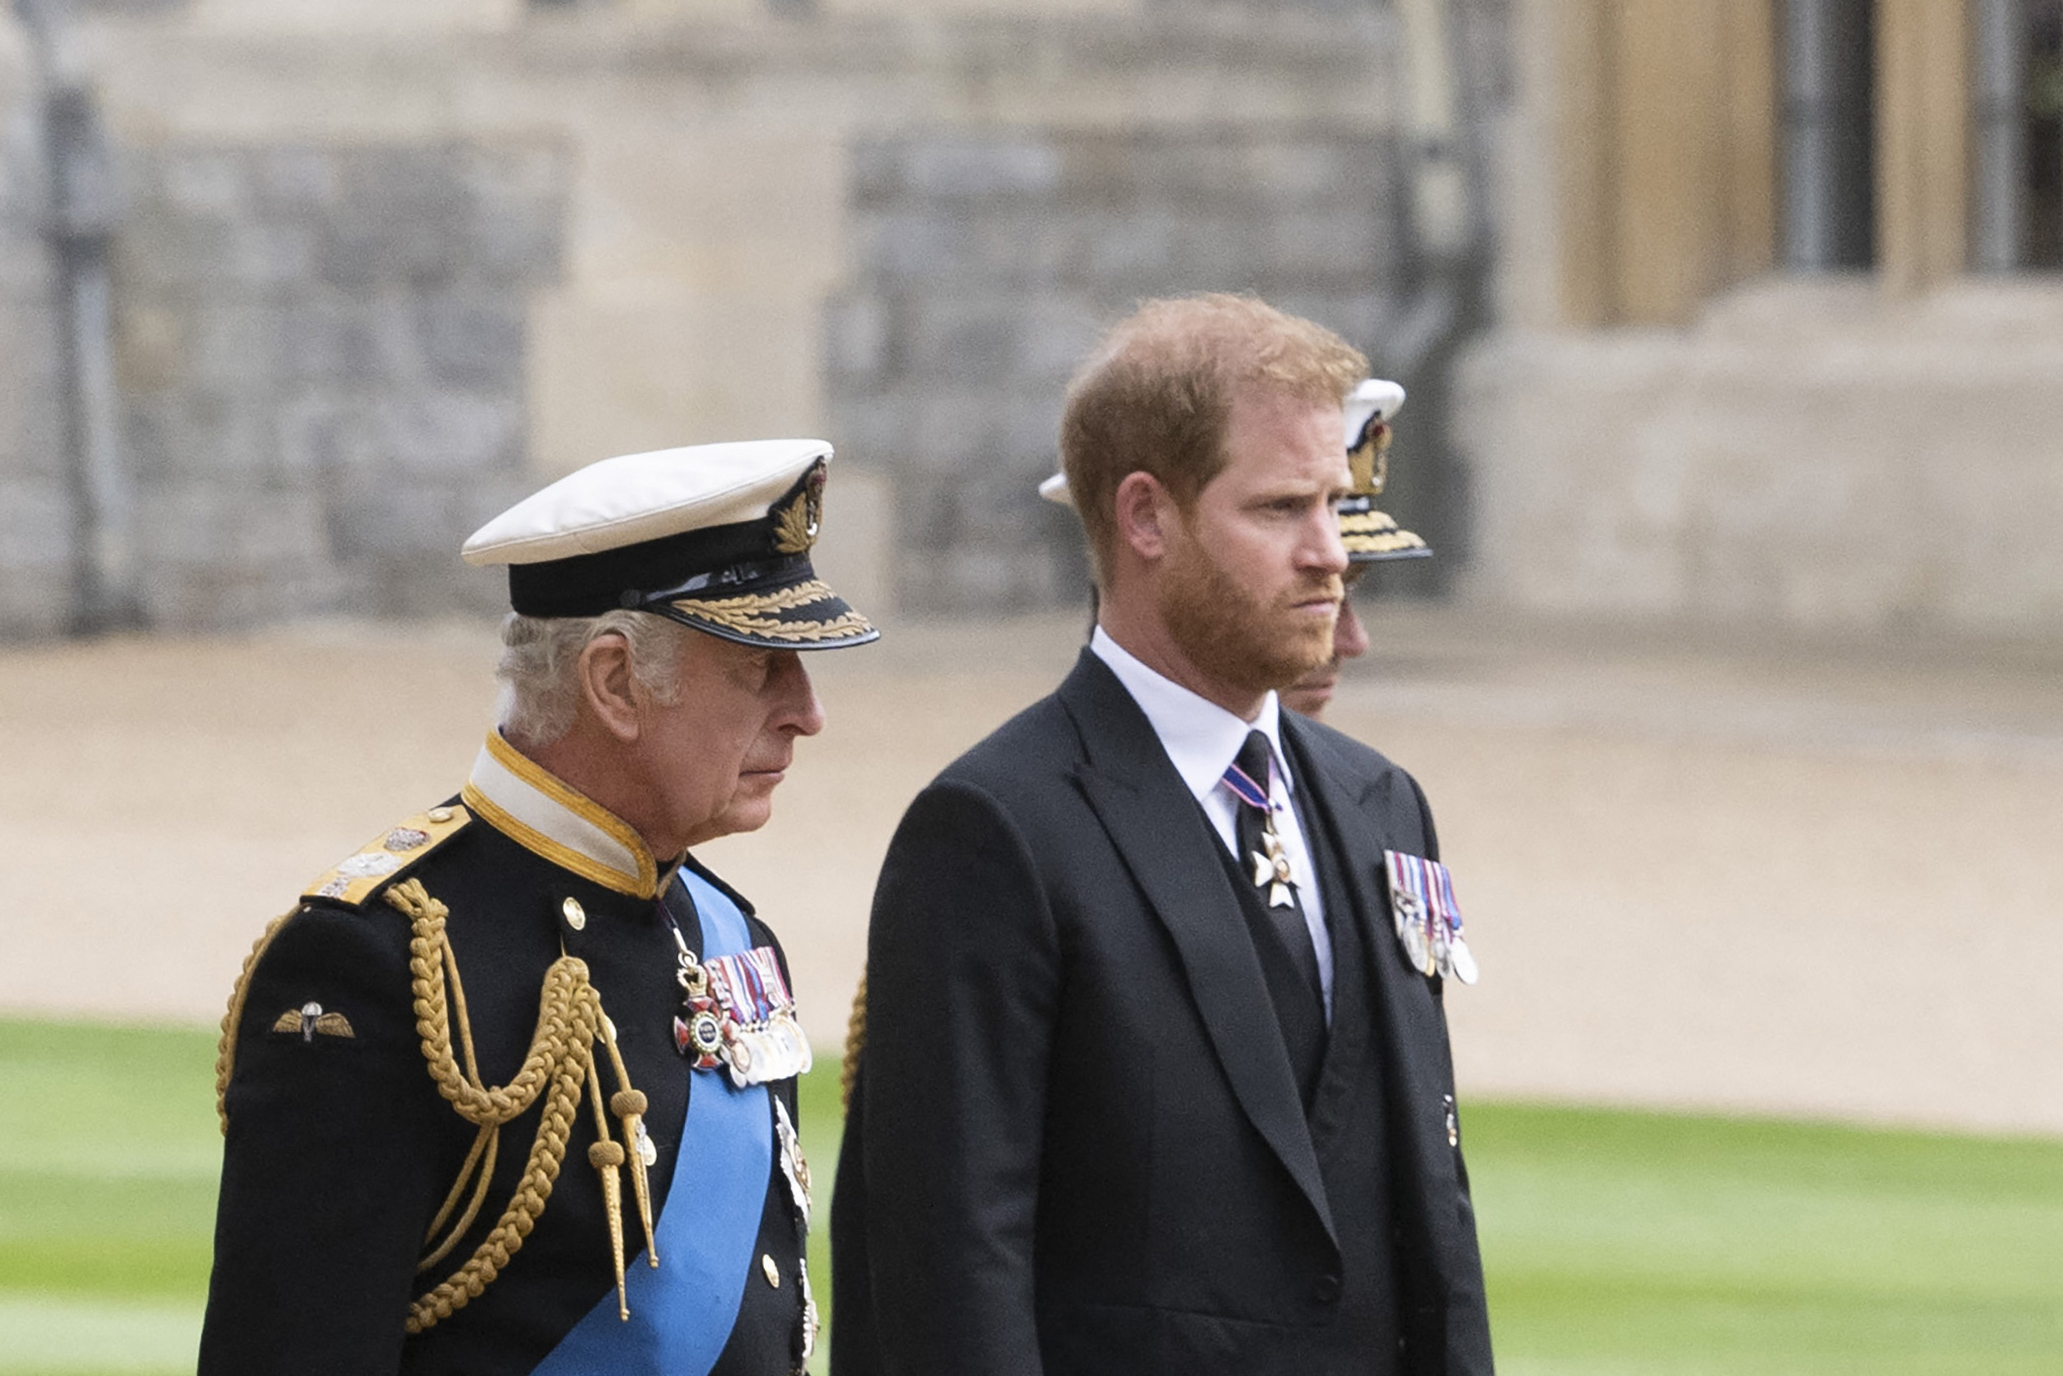 King Charles III and Prince Harry ahead of the Committal Service for the late Queen Elizabeth II in Windsor, England on September 19, 2022 | Source: Getty Images